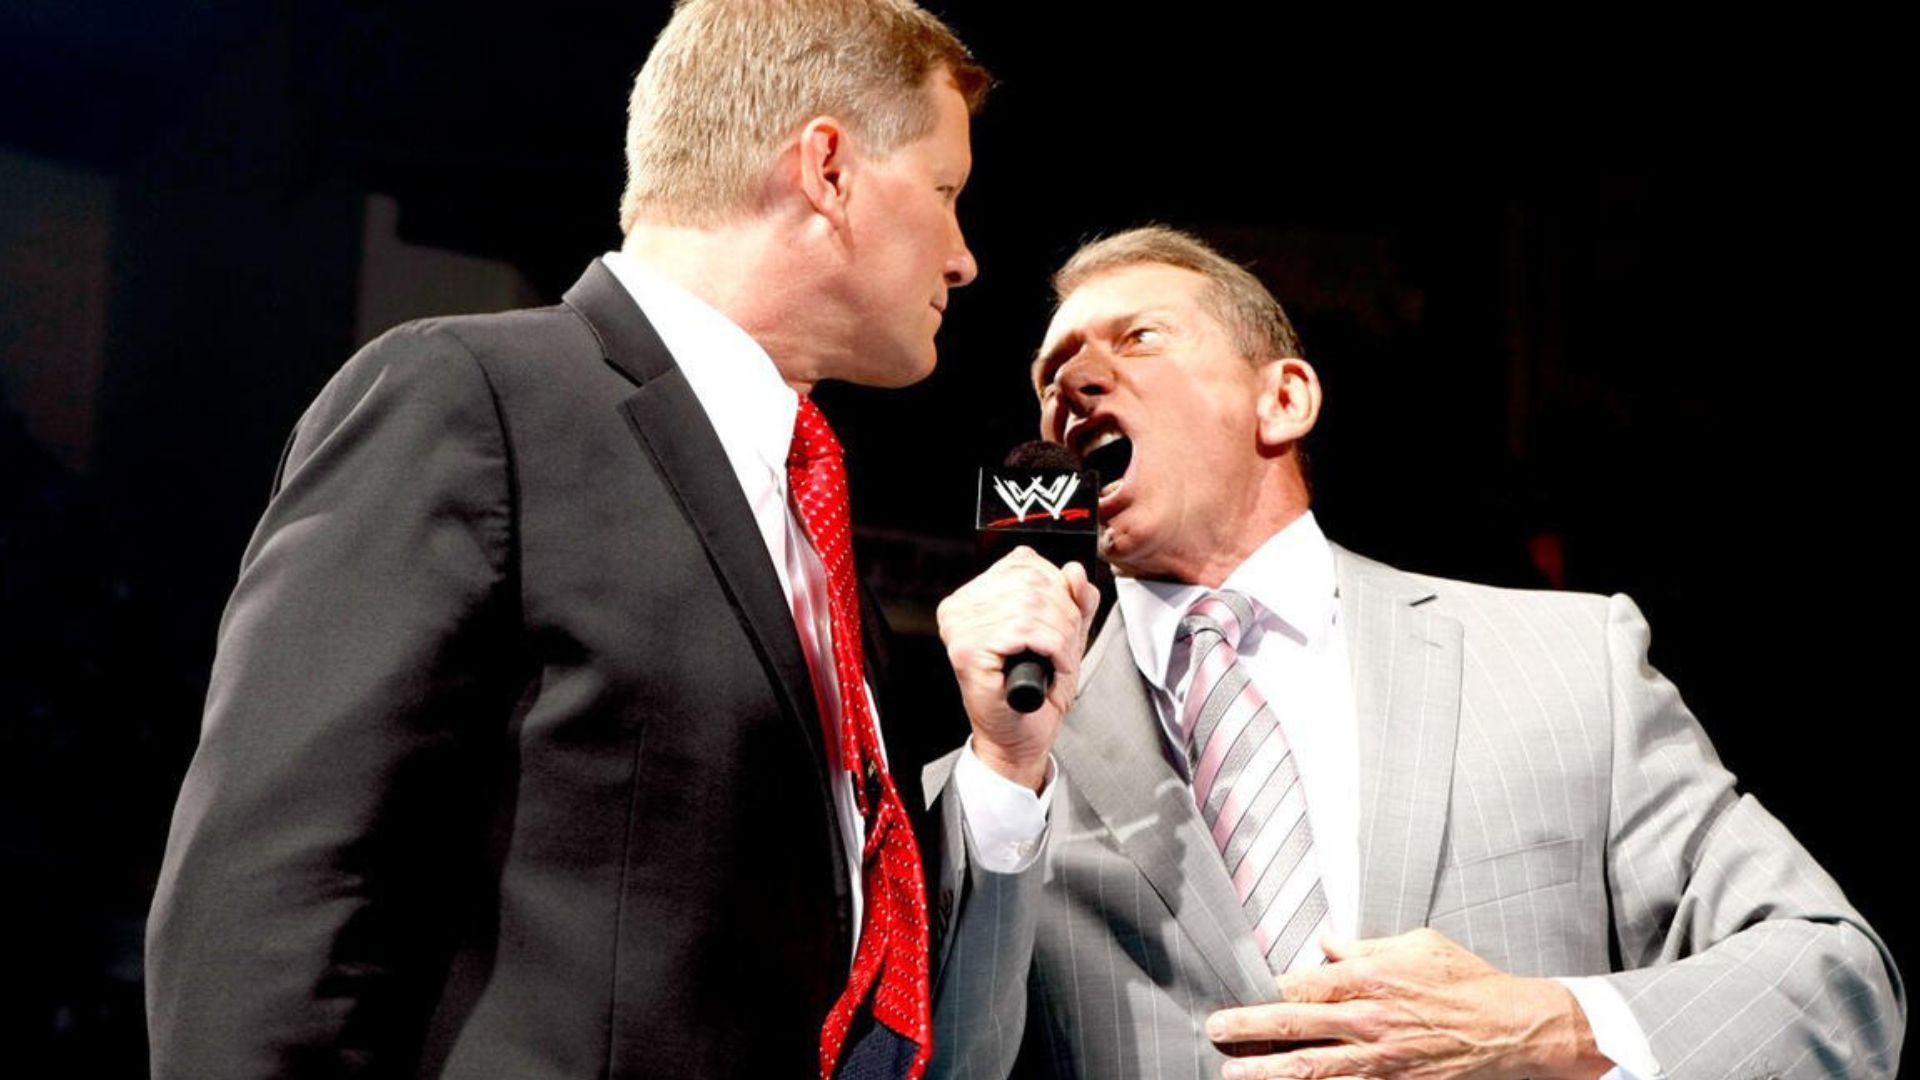 Laurinaitis is fhe former Head of Talent Relations for the company. [Photo: WWE.com]